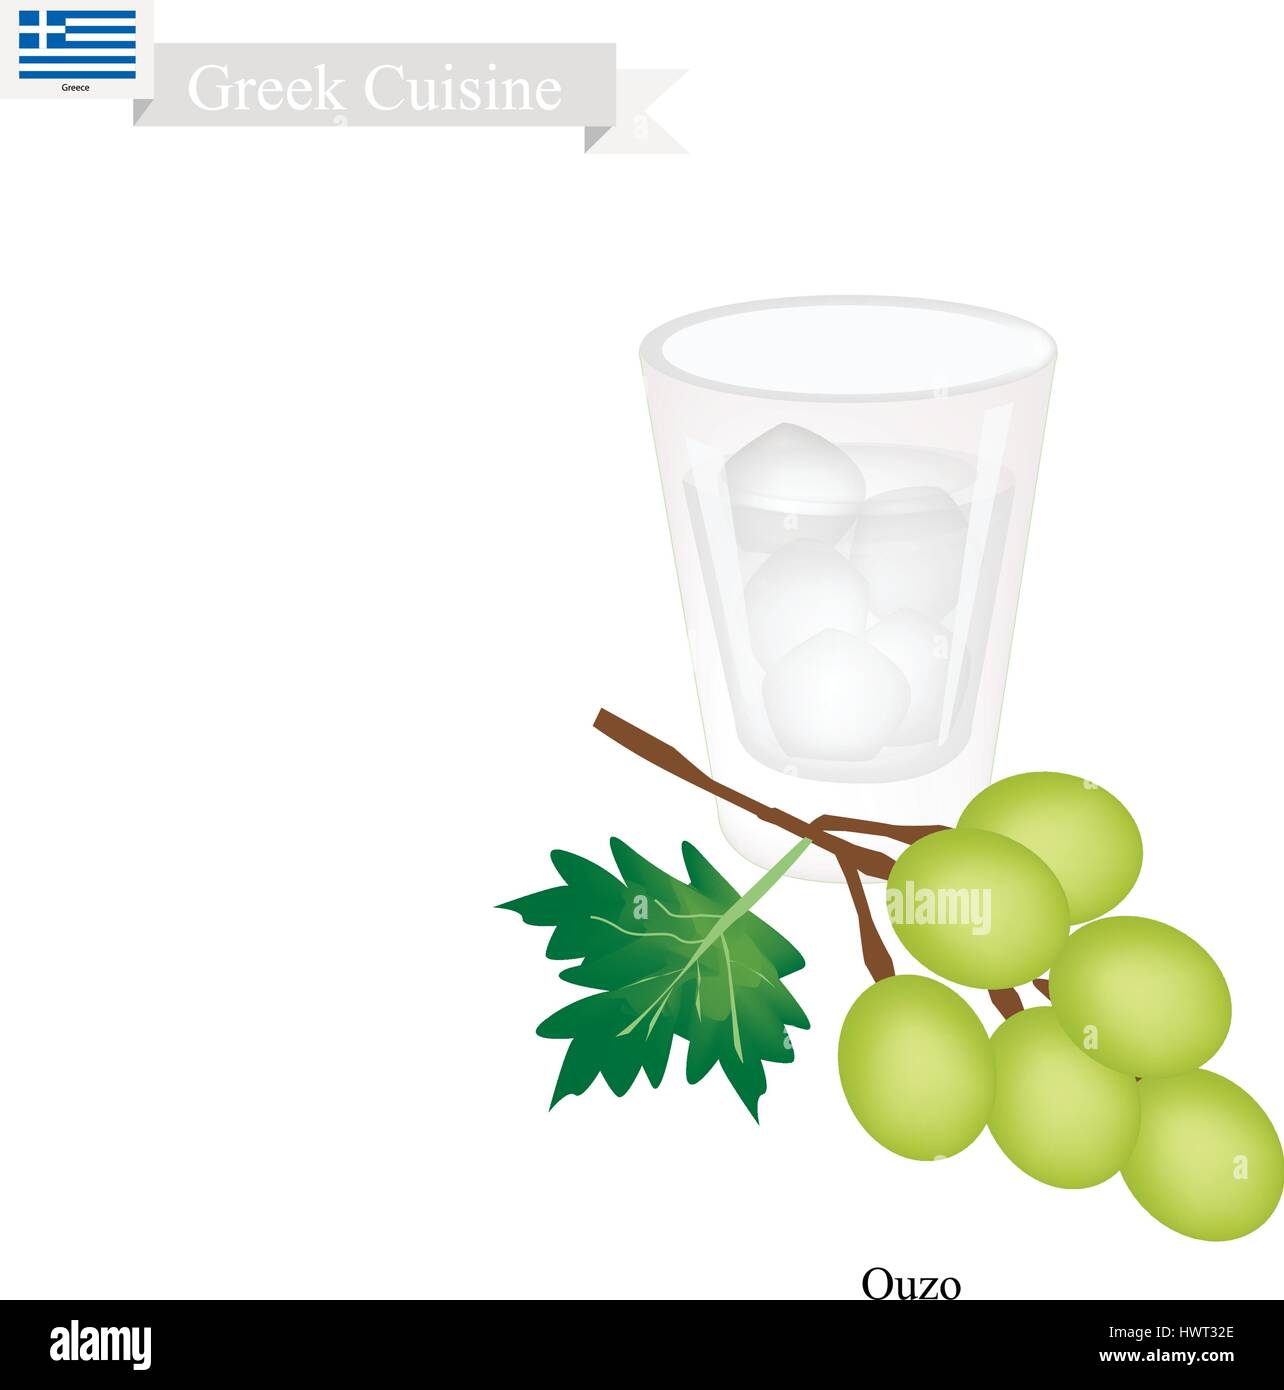 Greek Cuisine, Ouzo or Traditional Greek Aperitif Made From Pressed Grapes, Aniseed, Licorice, Mint, Wintergreen, Fennel, Hazelnut and Berries. One of Stock Vector